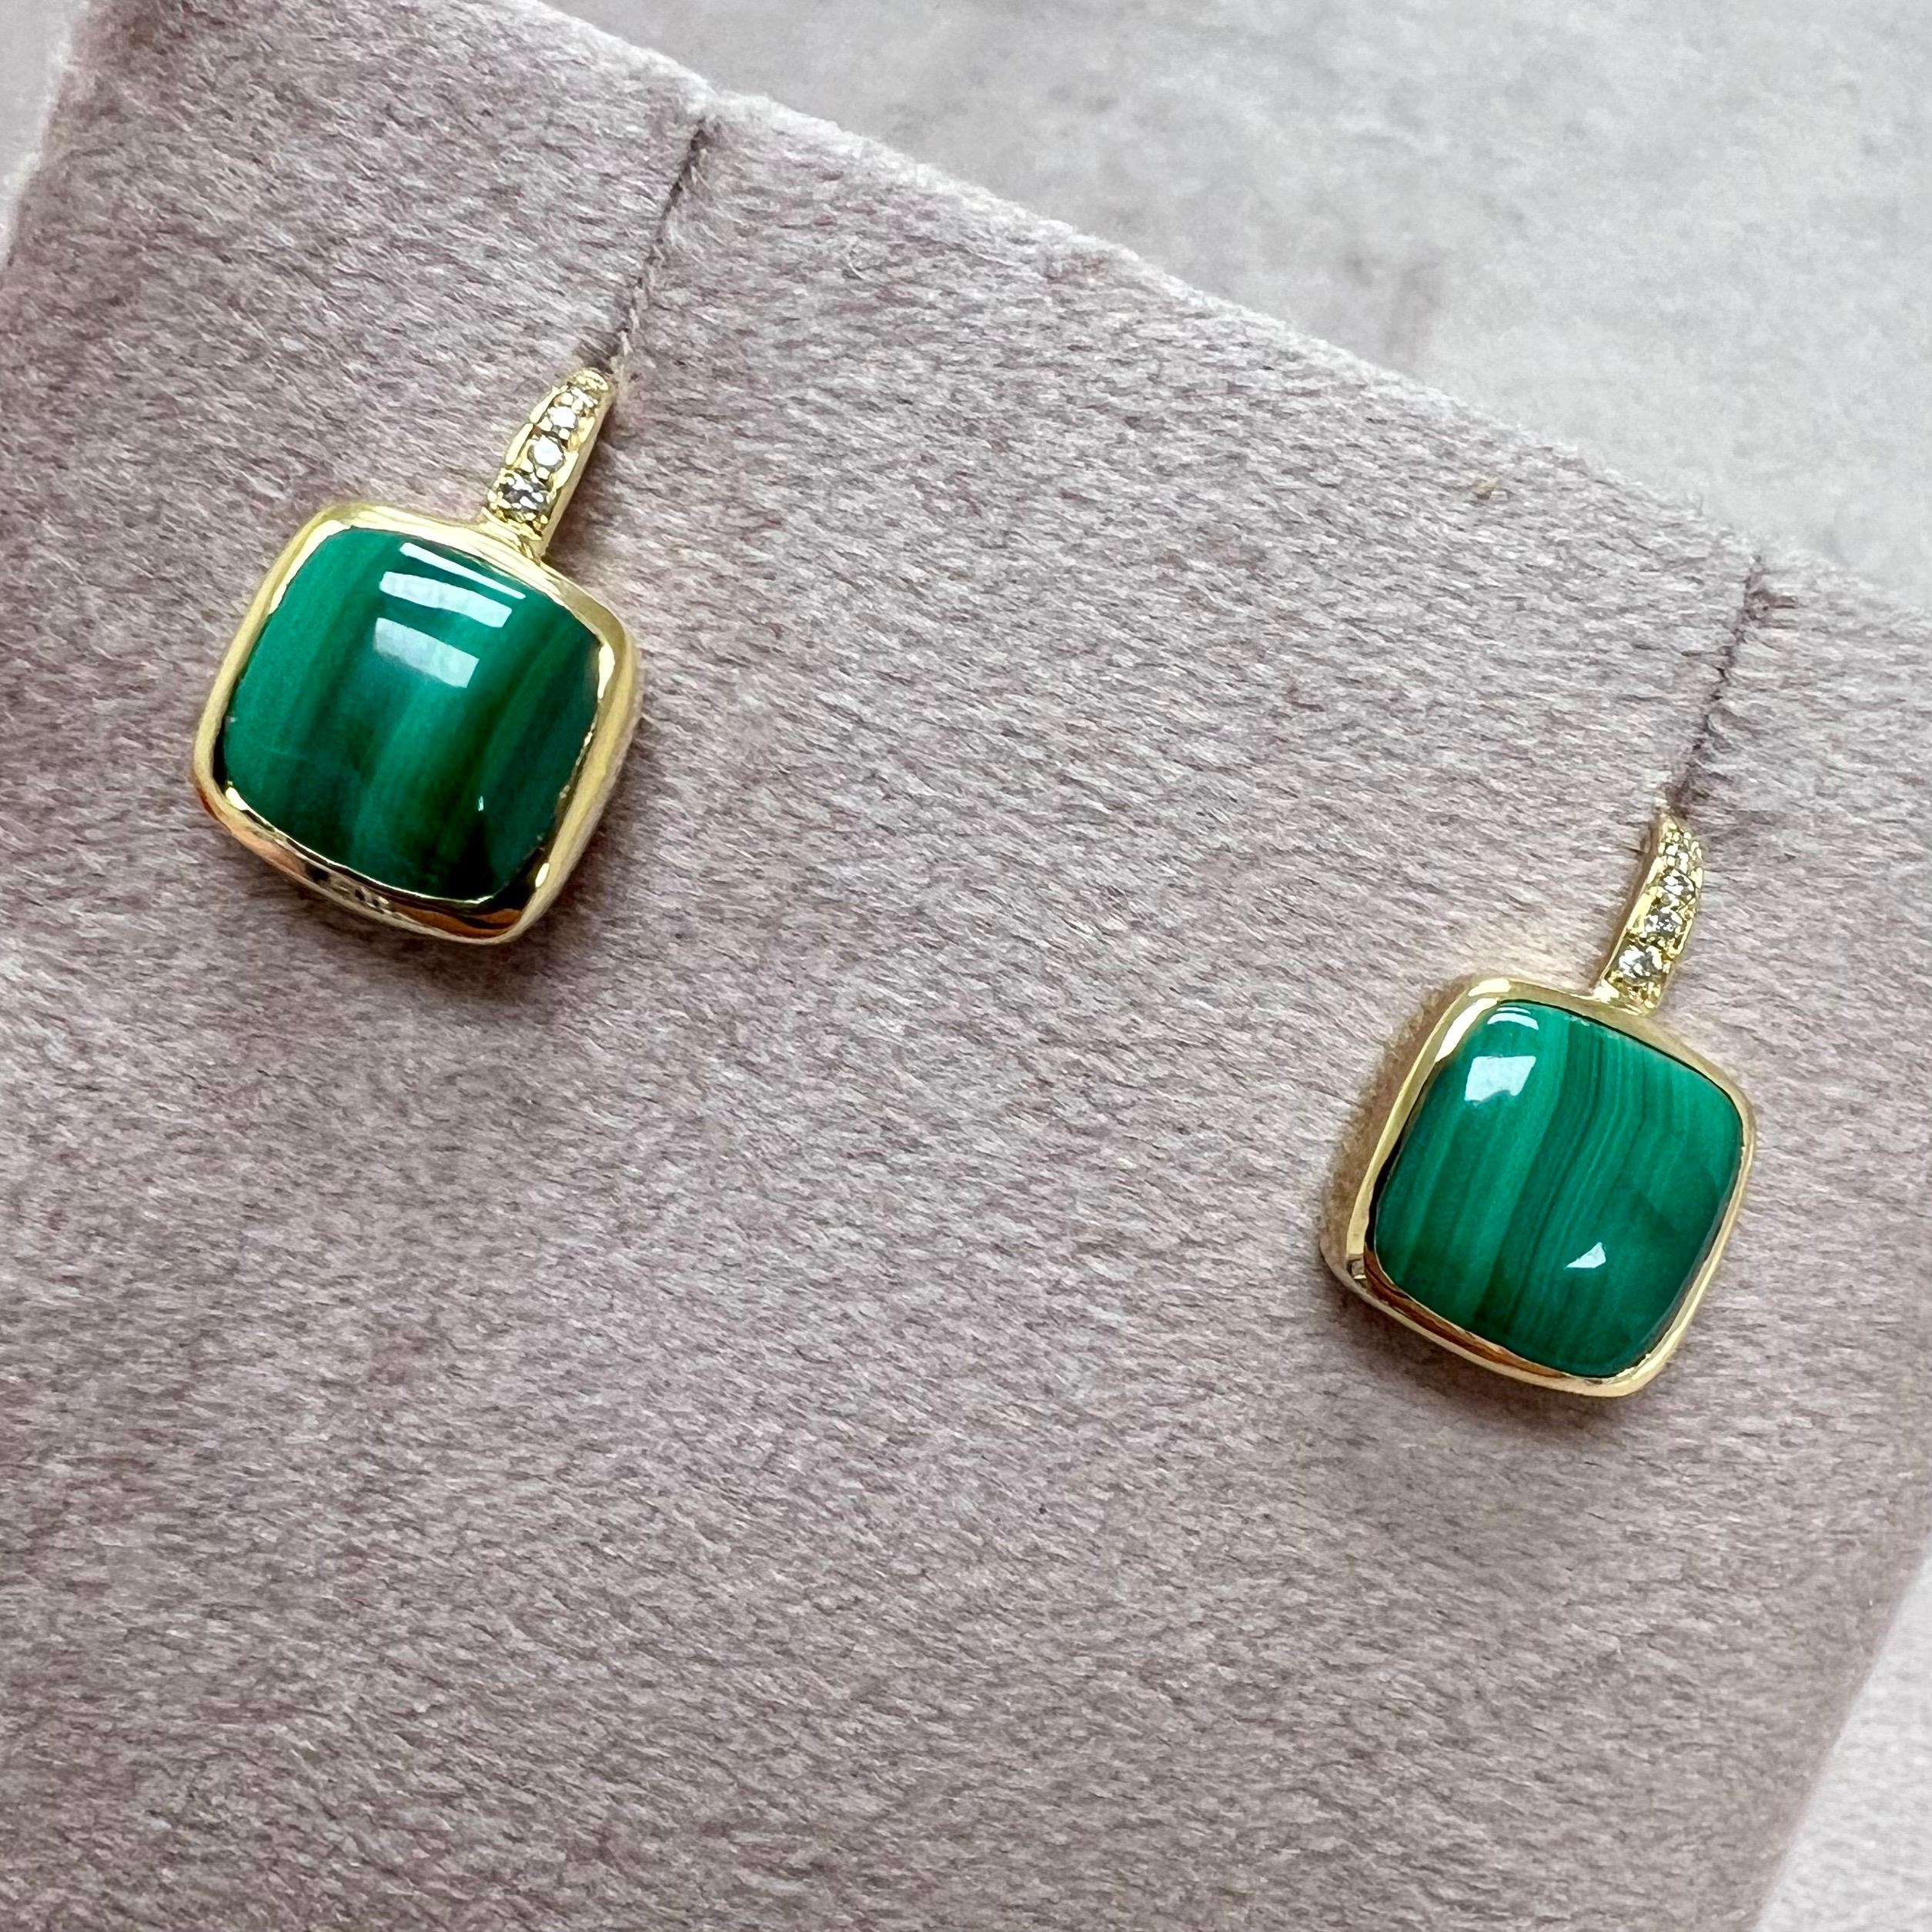 Created in 18 karat yellow gold
Malachite 11 carats approx.
Diamonds 0.05 carat approx.
French wire for pierced ears
Limited edition

Composed in 18 karat golden hue, these limited edition earrings comprise 11 carats of malachite and around 0.05